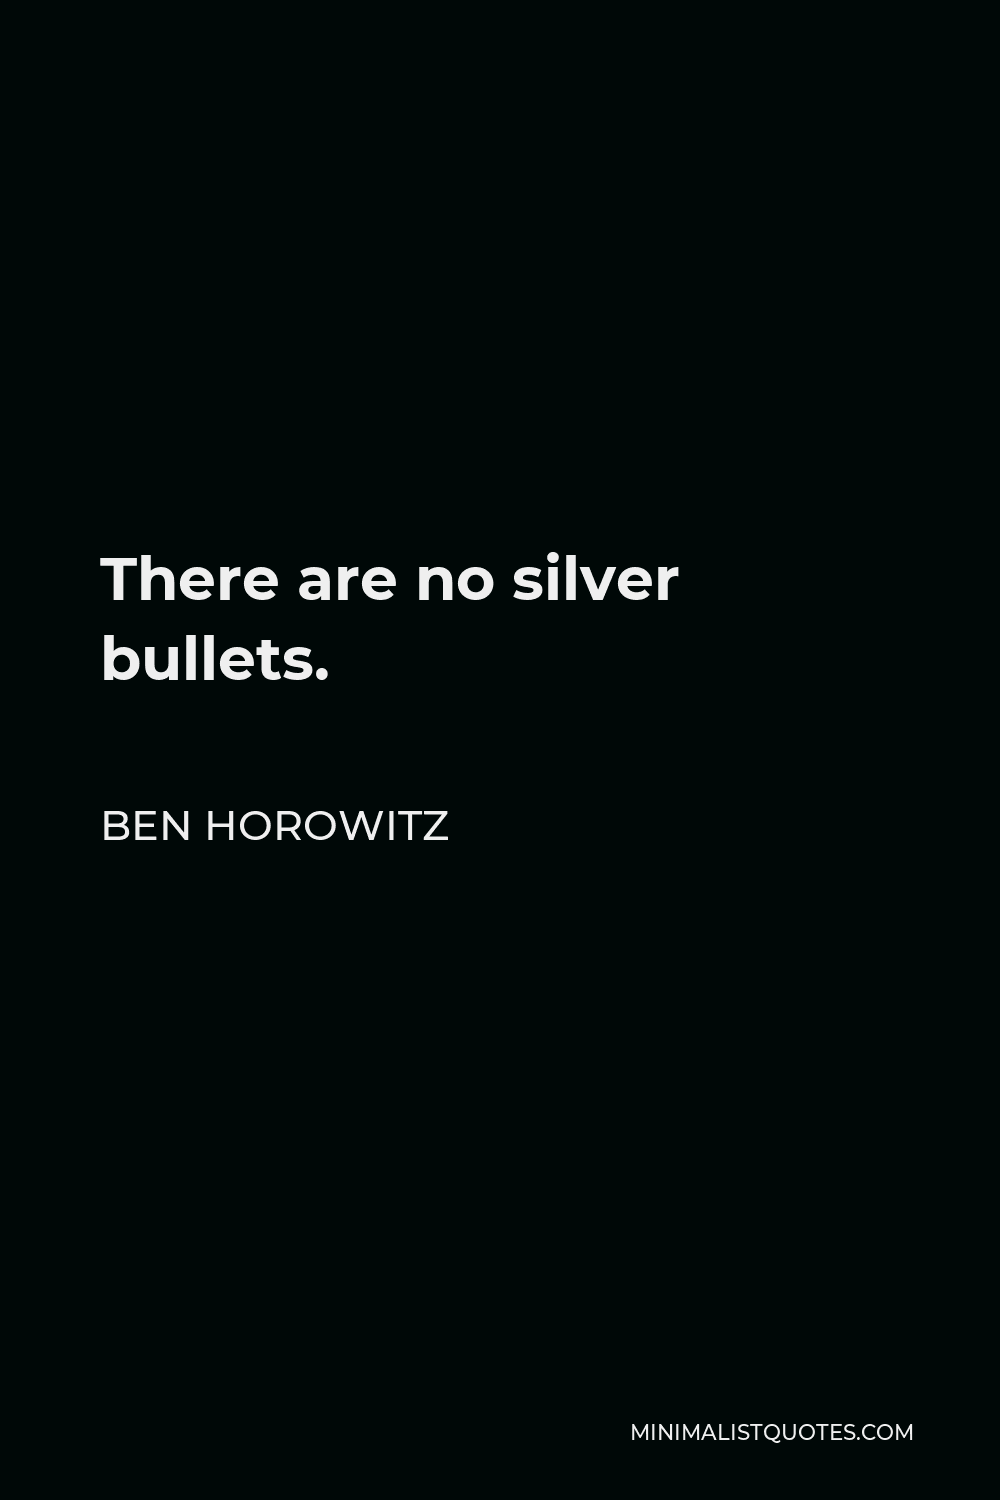 Ben Horowitz Quote - There are no silver bullets.